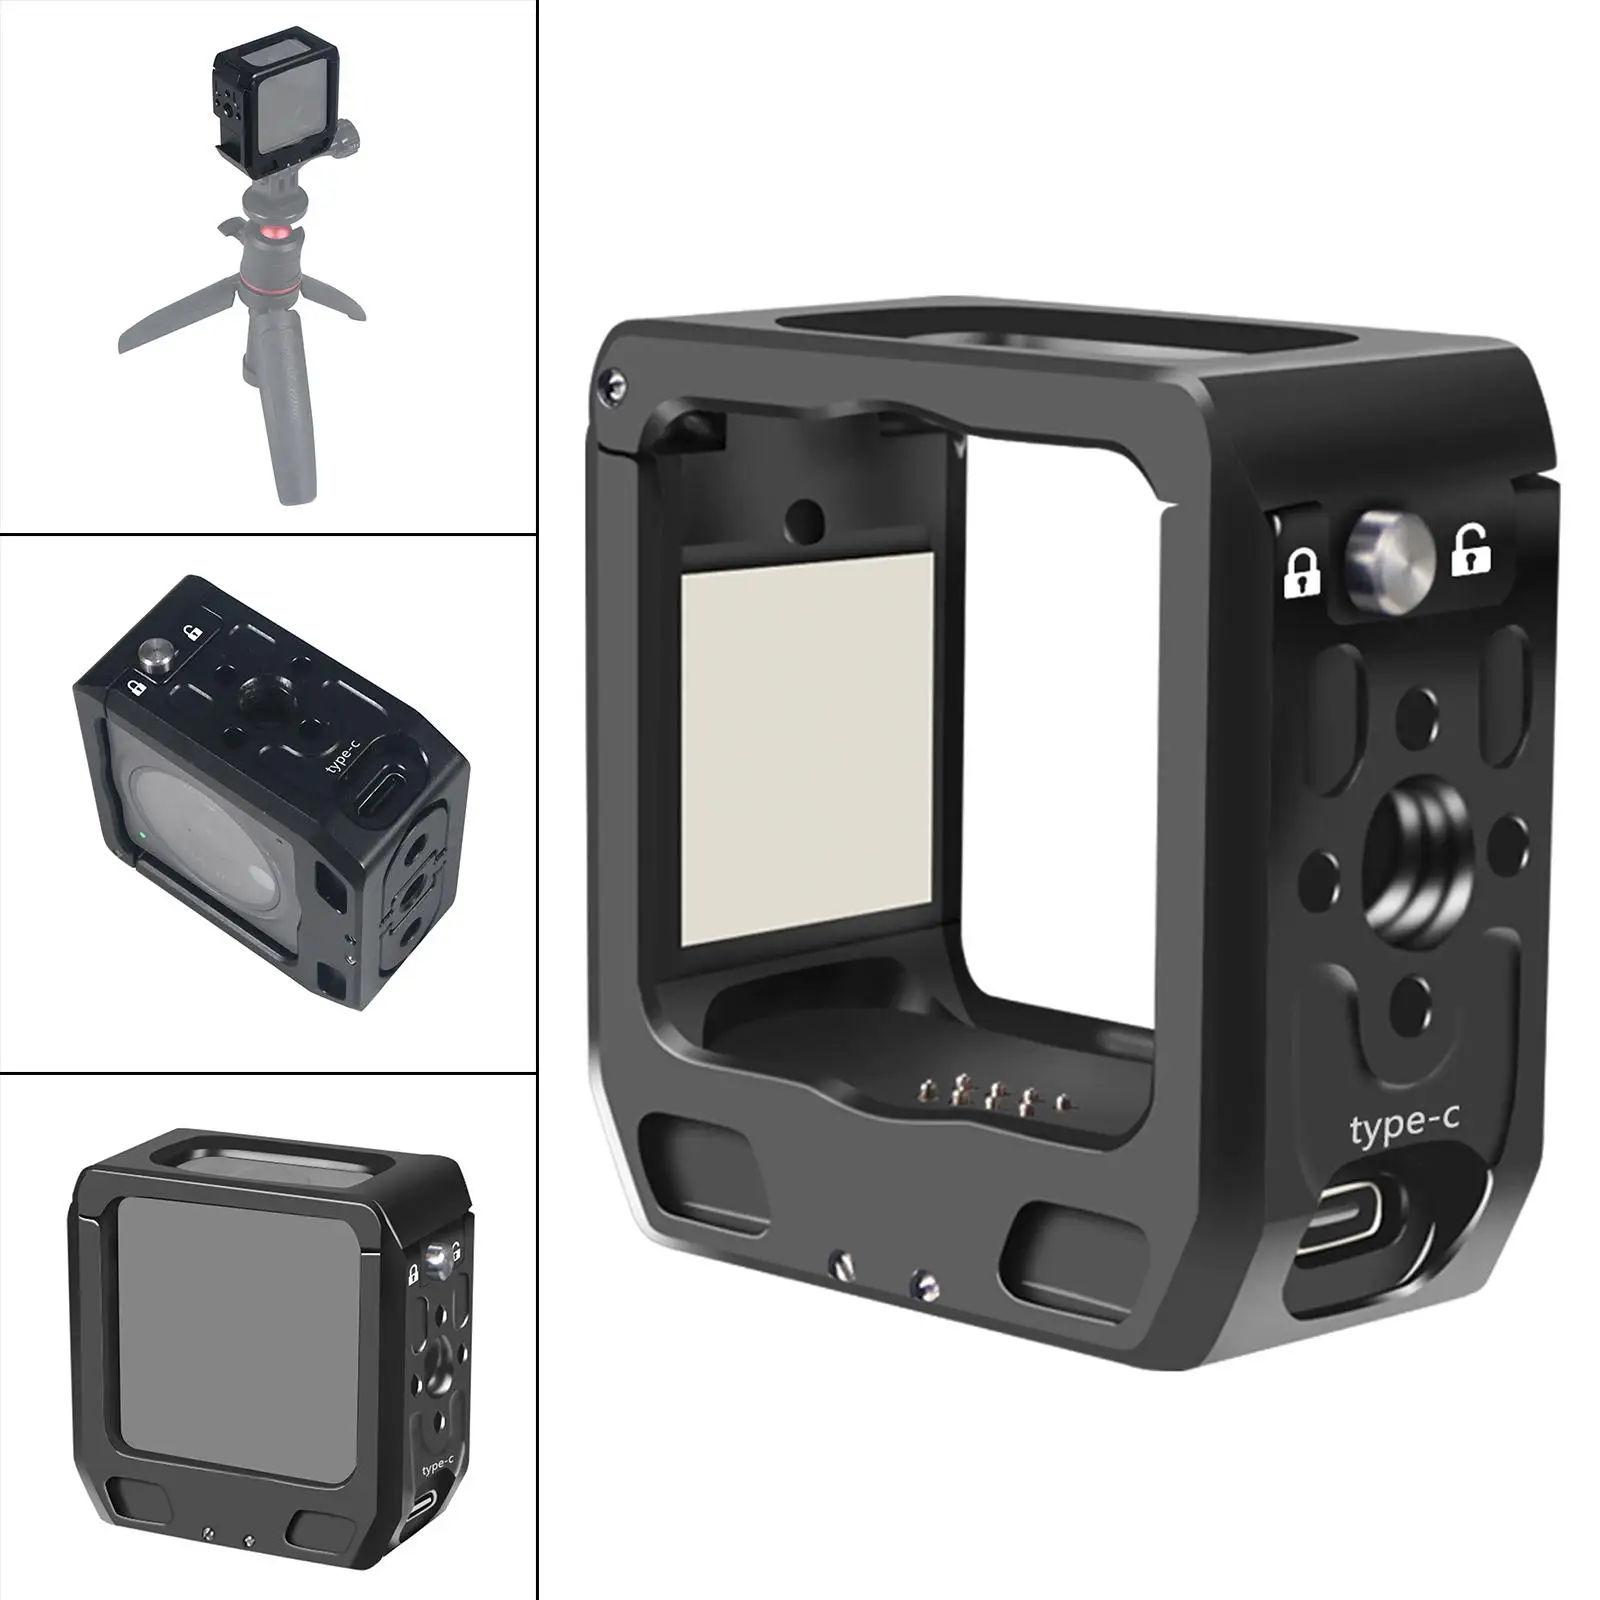 Aluminum Alloy Black Camera Rabbit Cage Frame Shell Housing Case for   Replacement Parts